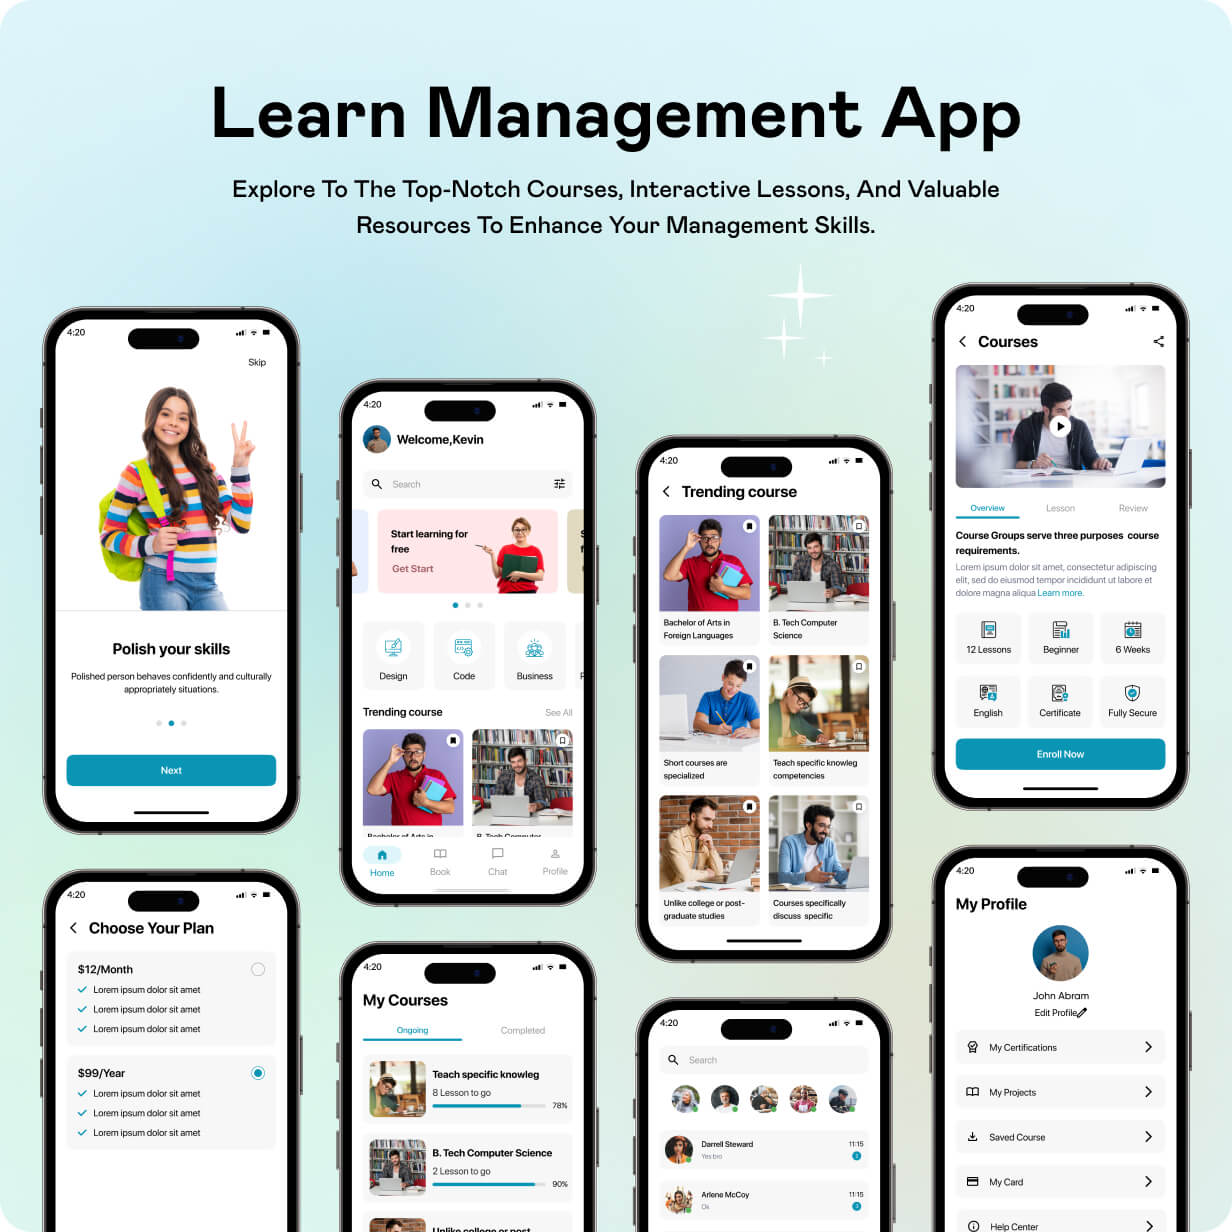 StudySync UI template | LearnManagement App in Flutter | Learn Career Skills App Template - 15